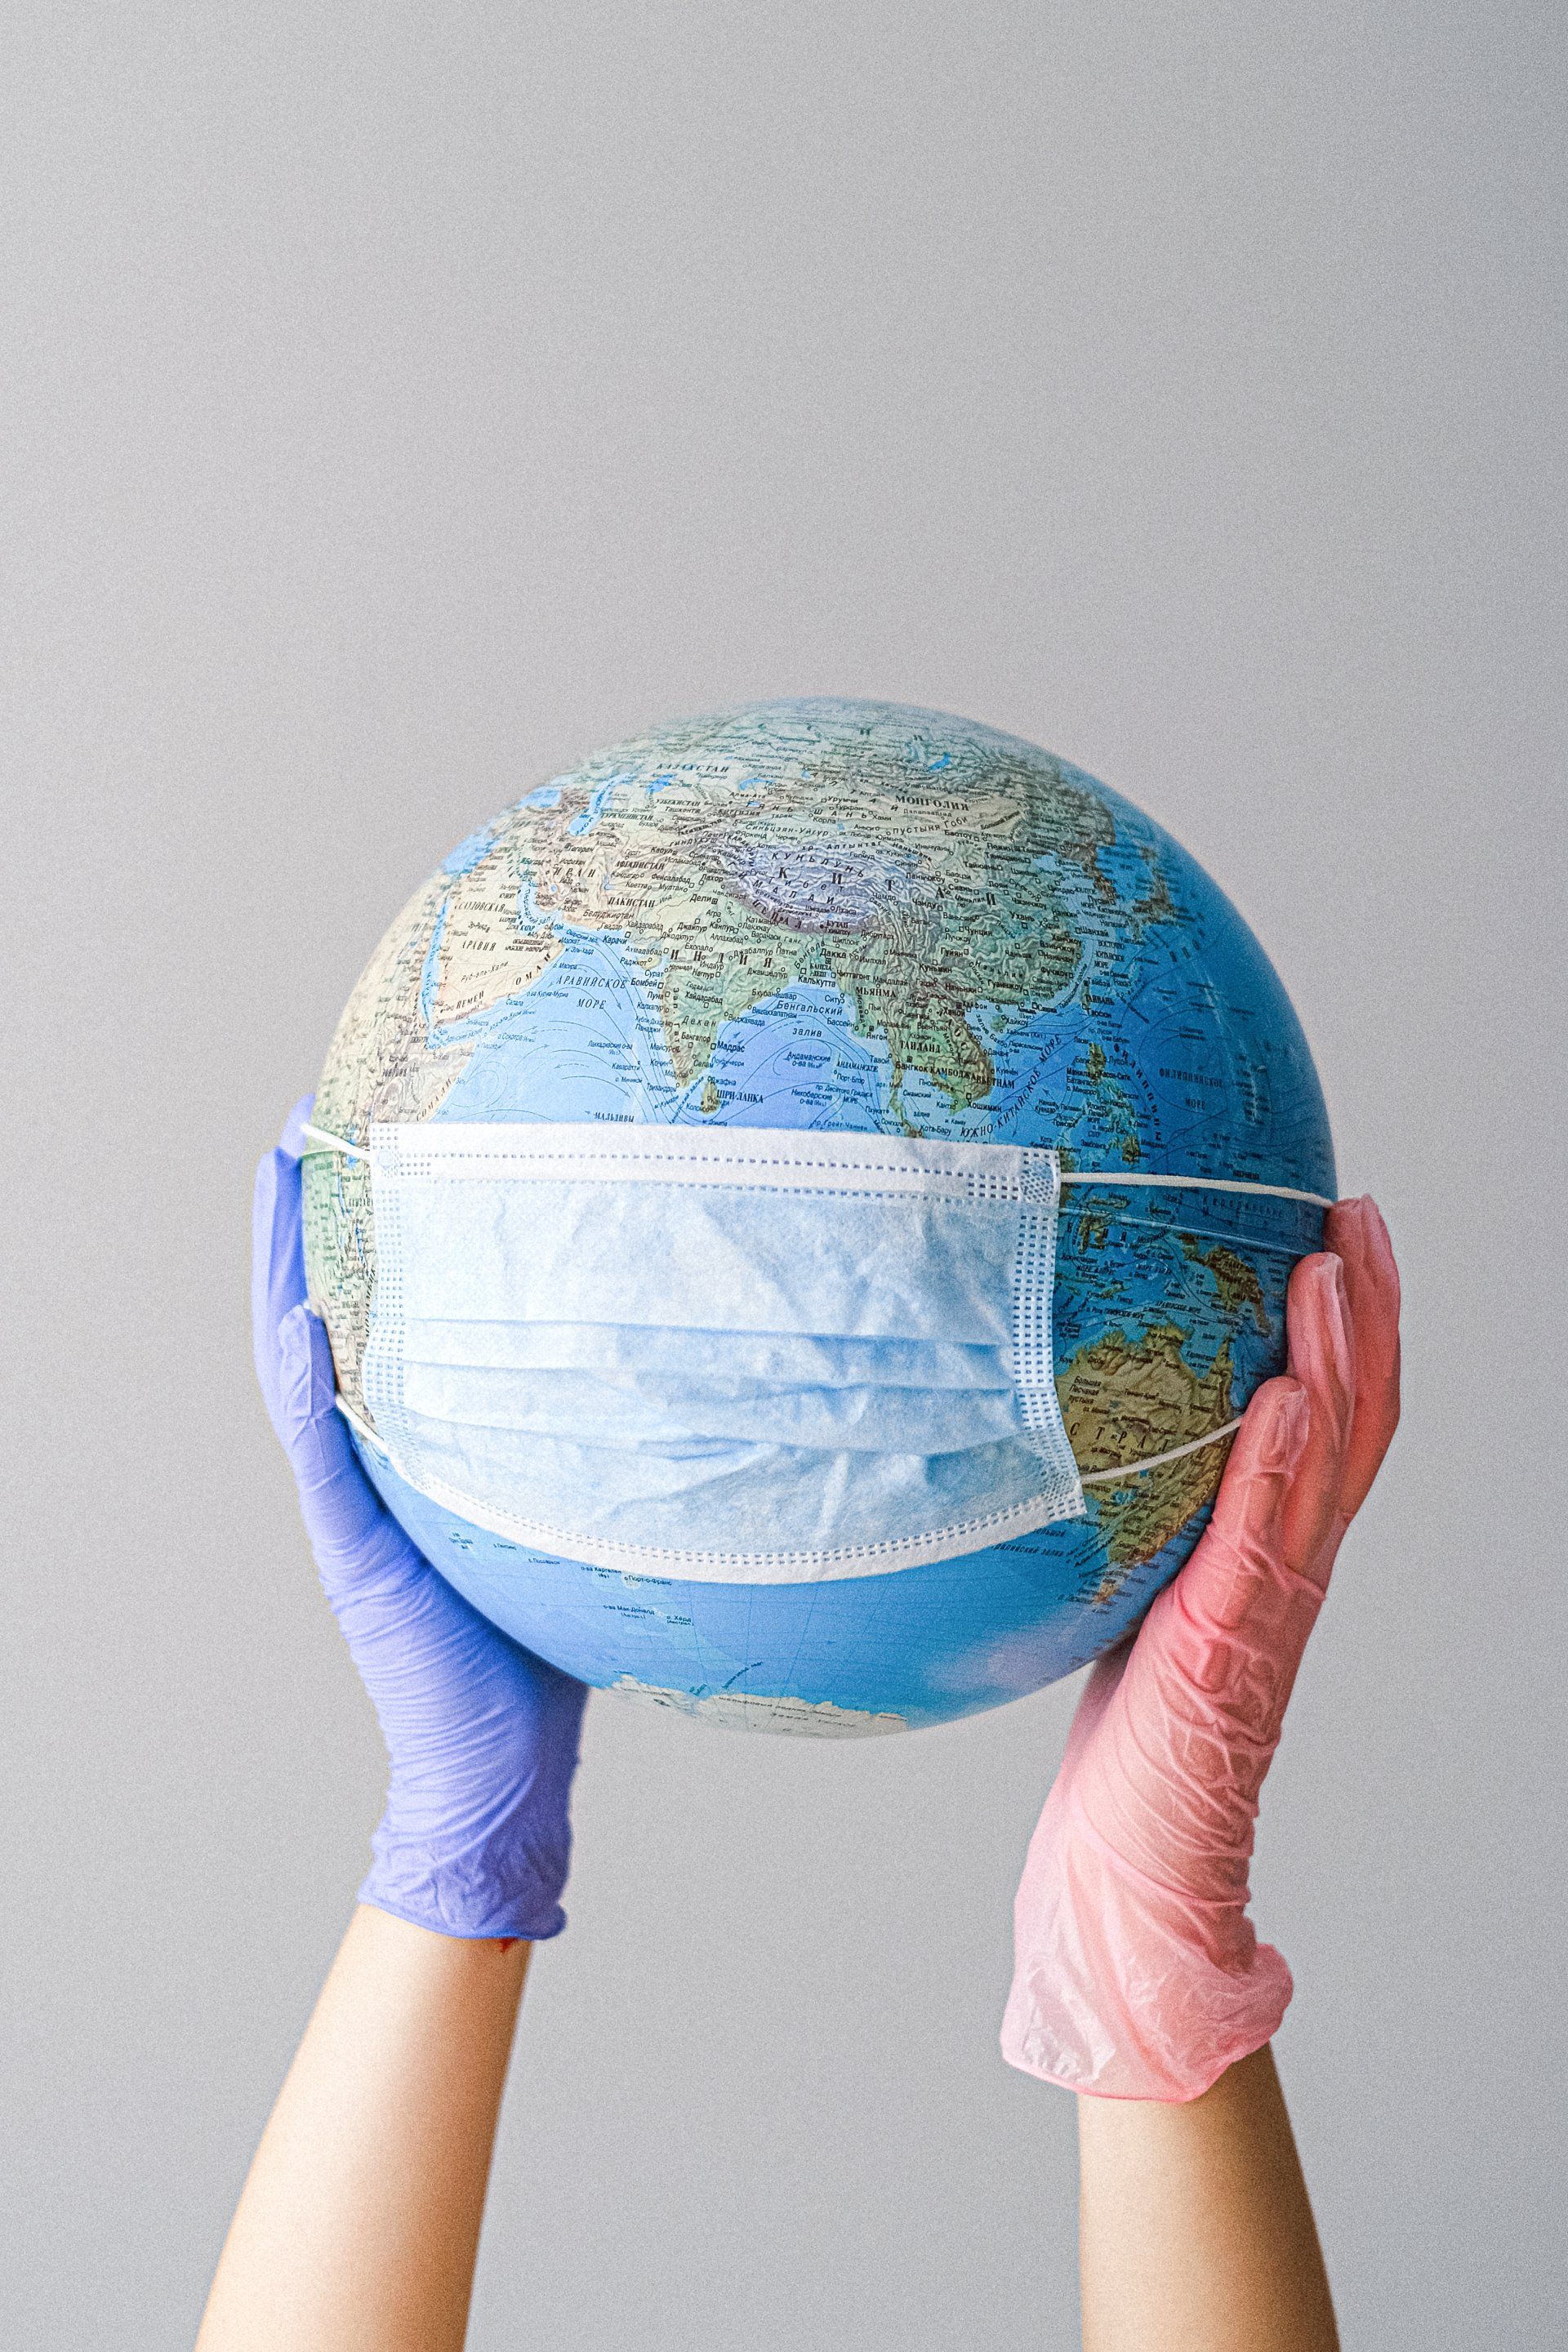 A person wearing gloves is holding a globe with a mask on it. long covid and ketamine